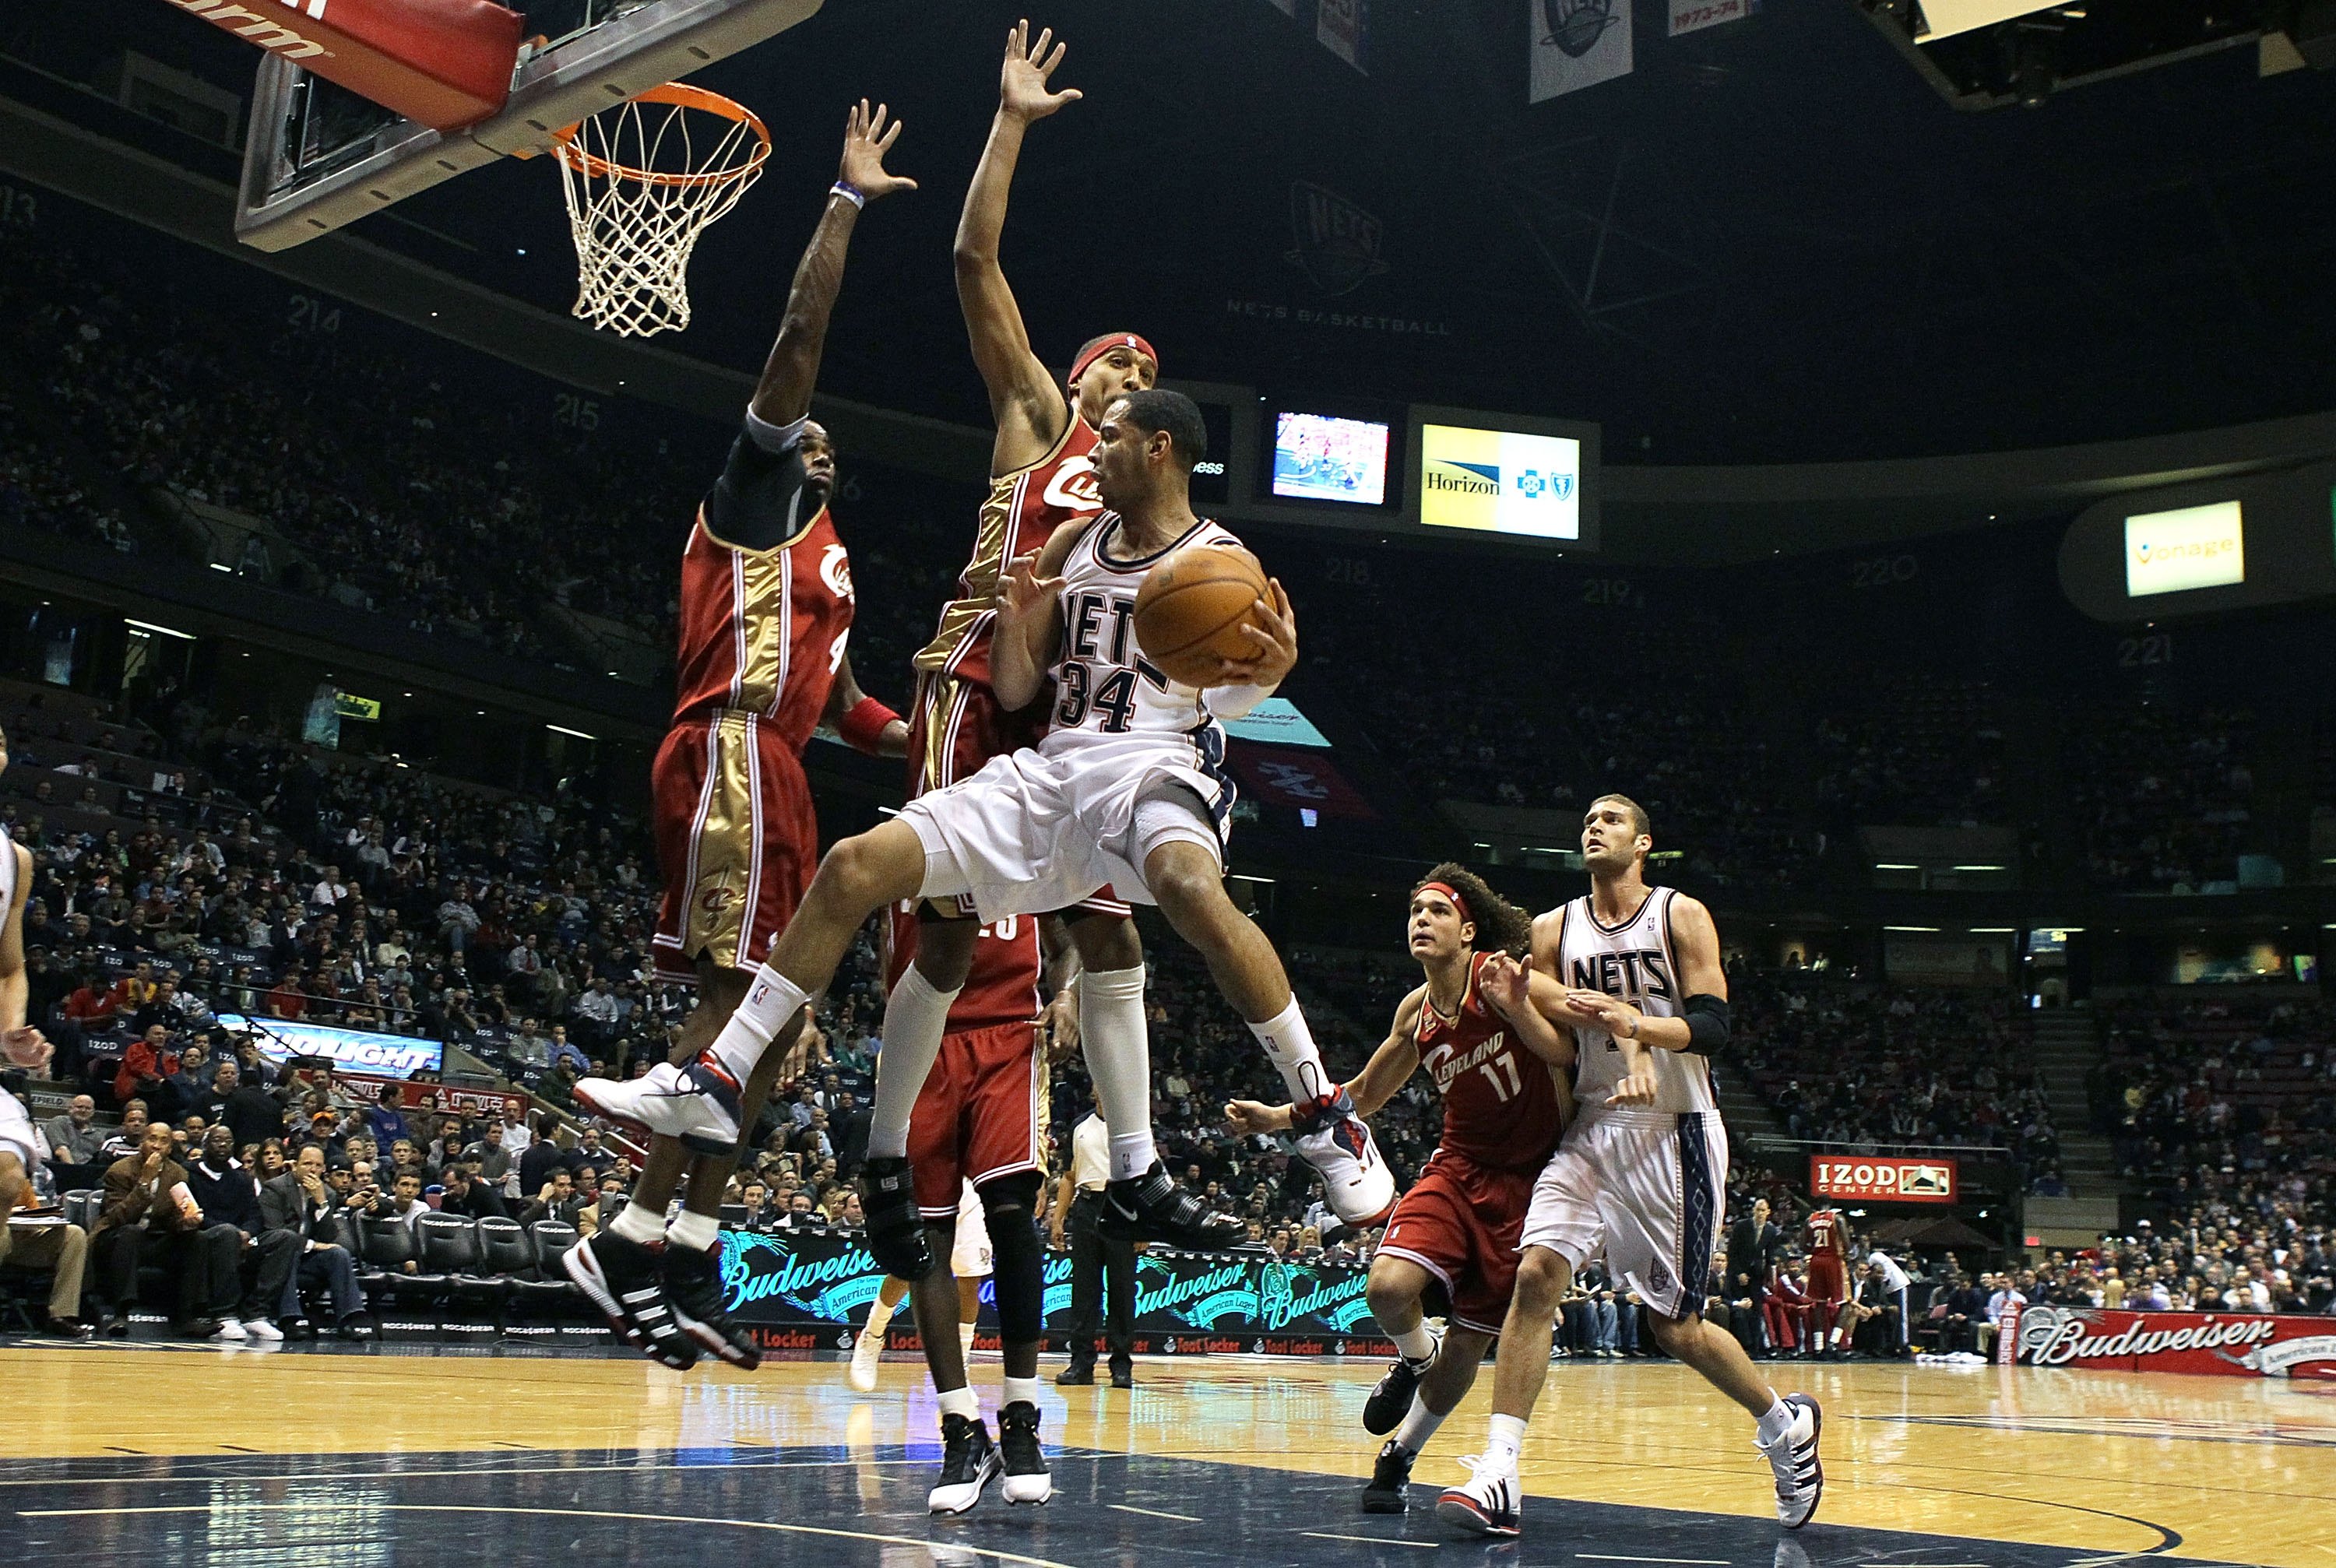 EAST RUTHERFORD, NJ - MARCH 03:  Devin Harris #34 of the New Jersey Nets drives to the hoop against the Cleveland Cavaliers at the Izod Center on March 3, 2010 in East Rutherford, New Jersey.NOTE TO USER: User expressly acknowledges and agrees that, by do